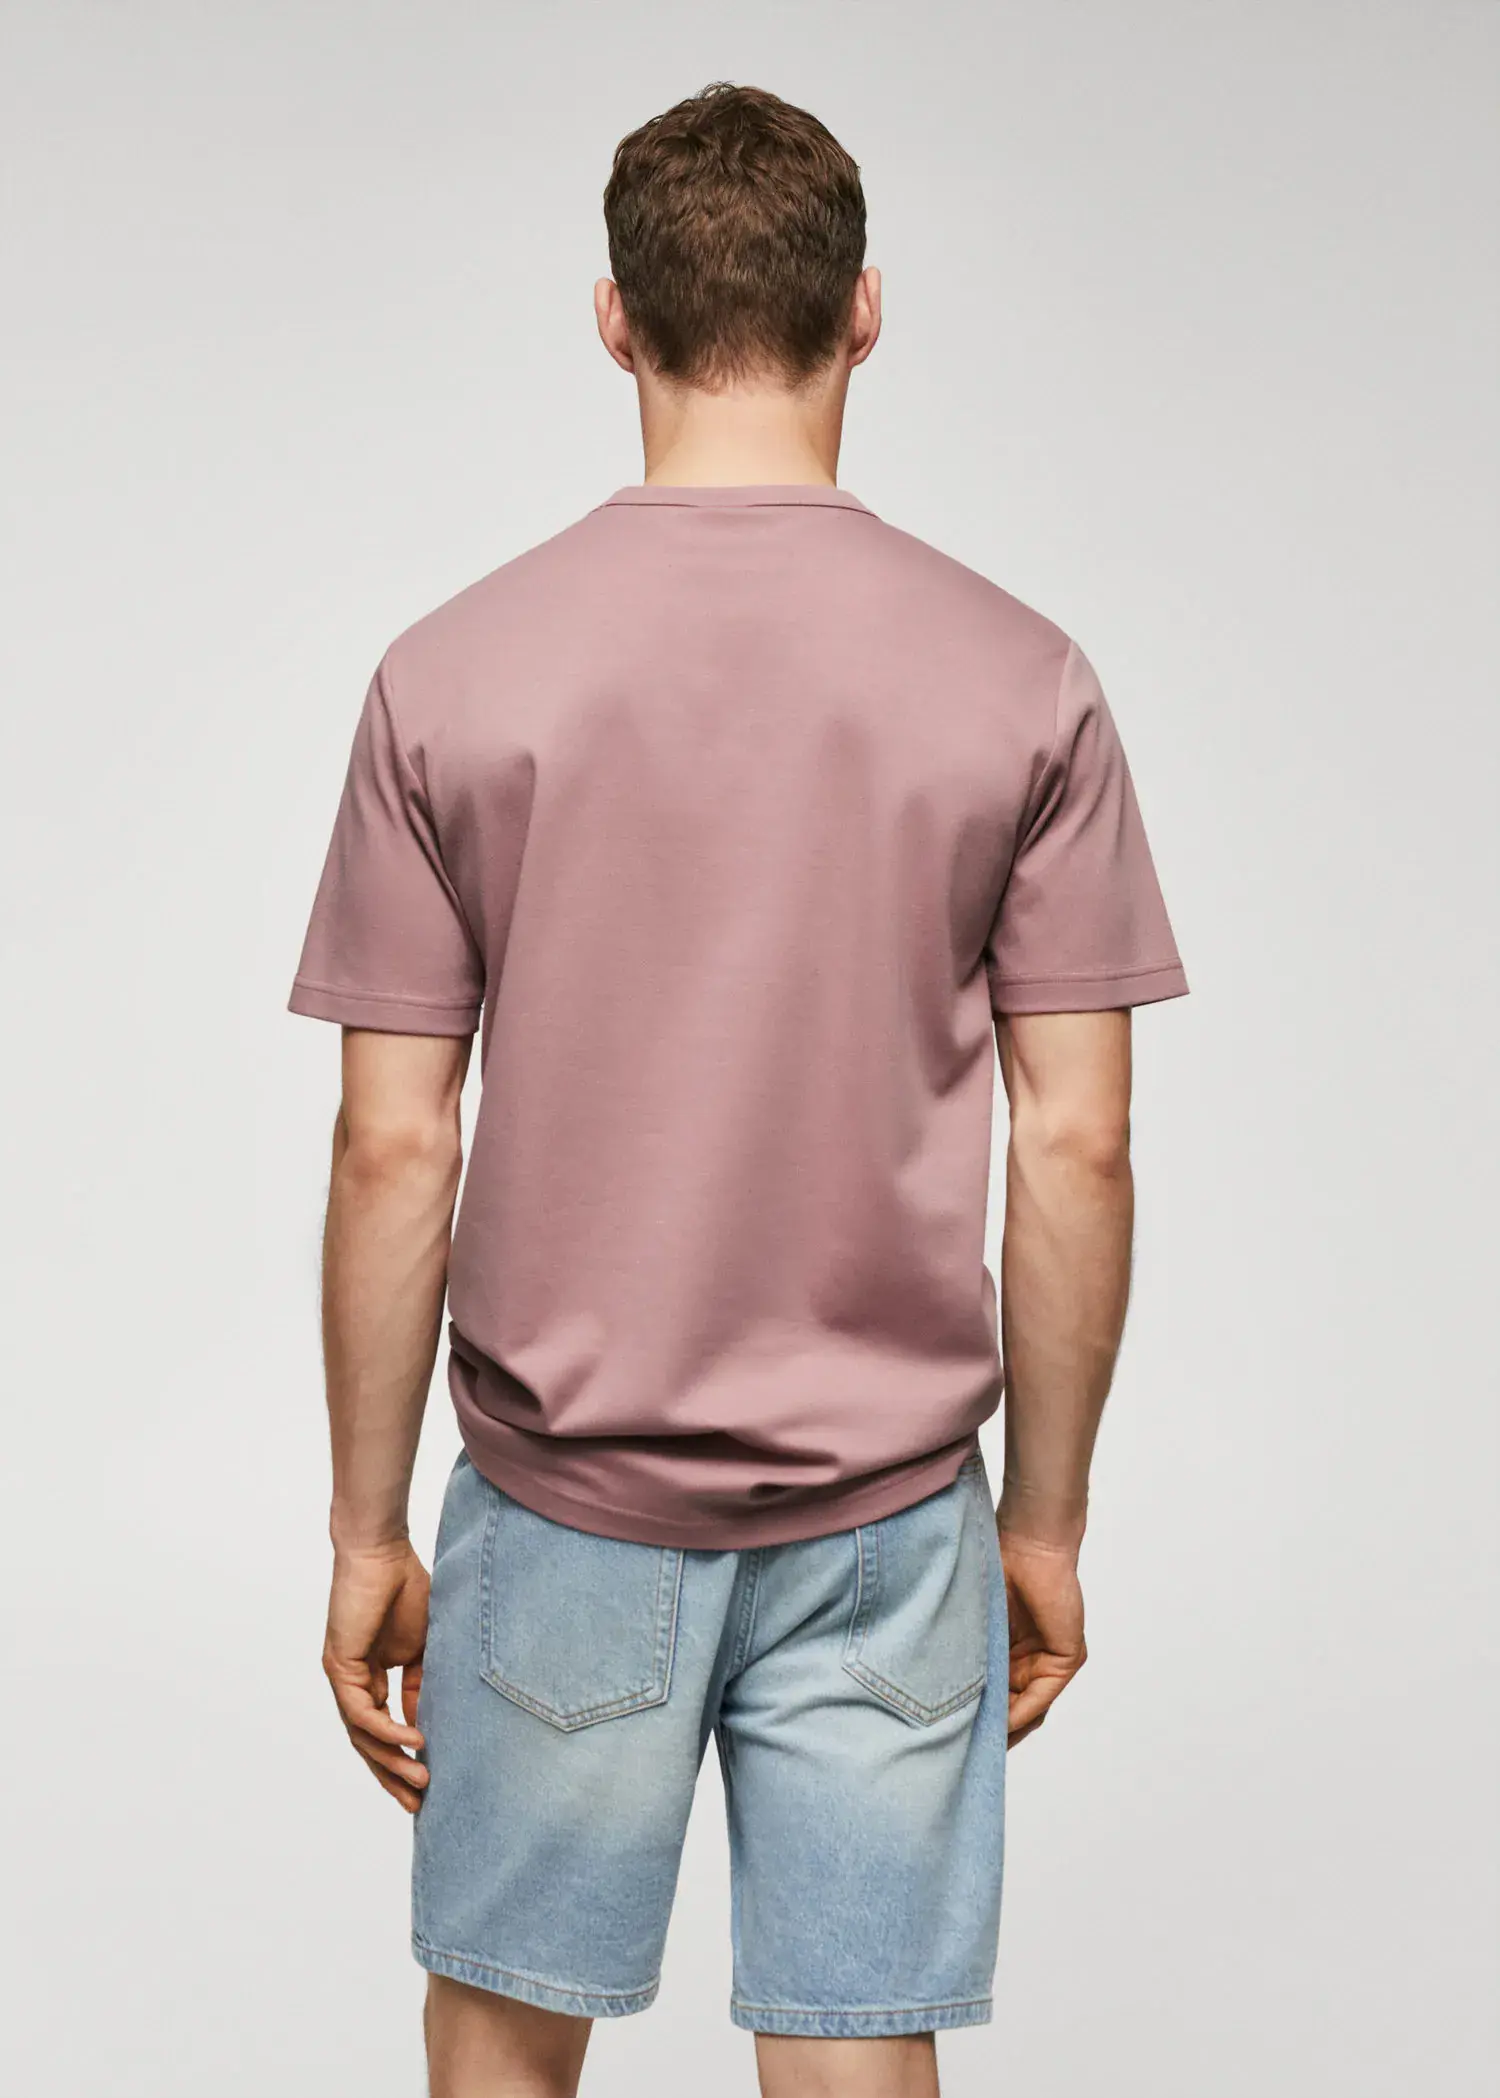 Mango 100% cotton t-shirt with pocket. a man wearing a pink shirt and jeans. 